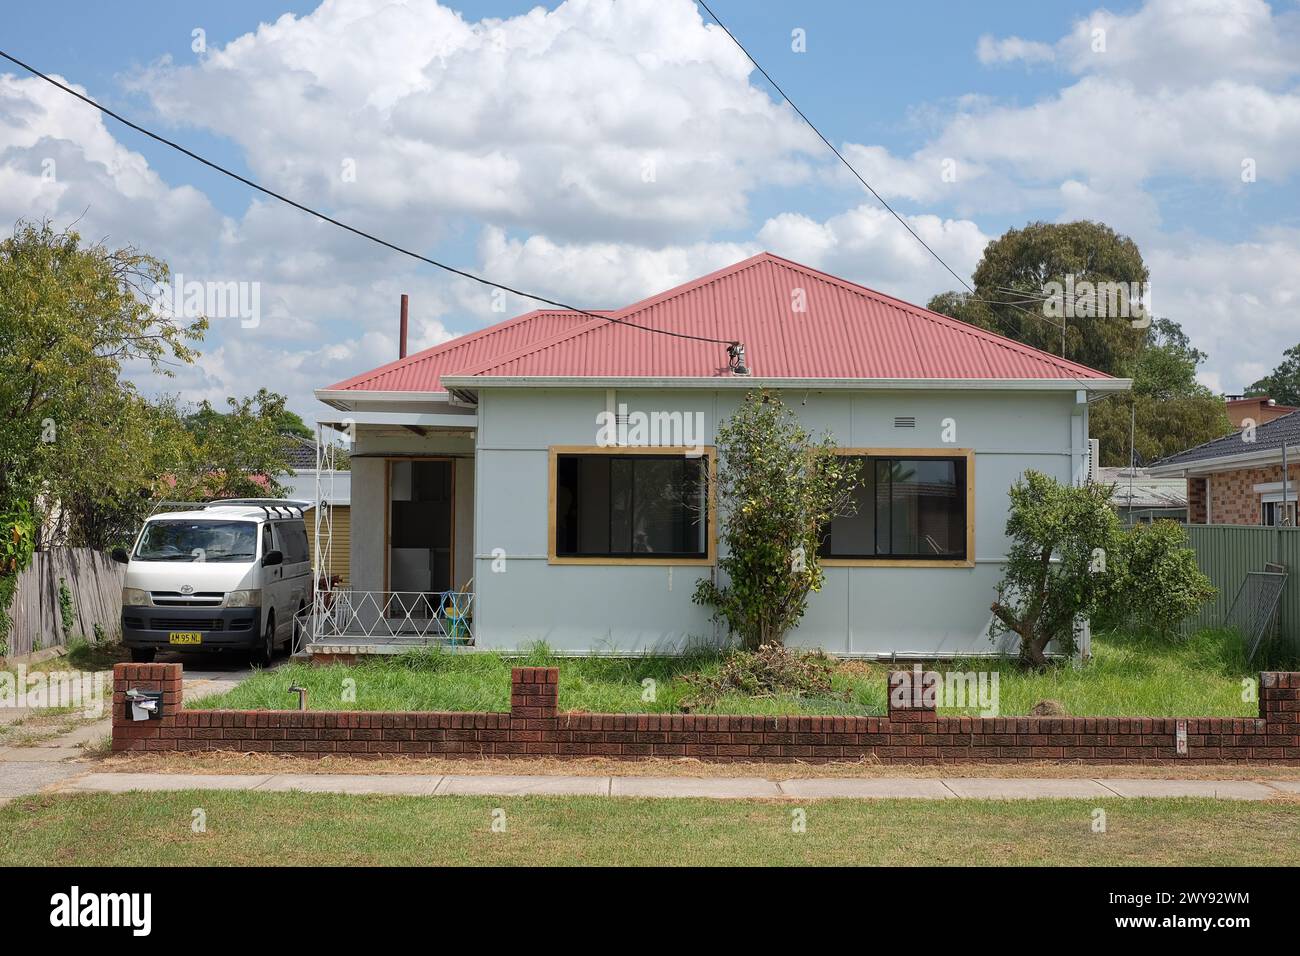 A lowset fibro house with a red corrugated iron roof, trees, shrubs and clouds in the Western Sydney suburb of Canley Vale Stock Photo